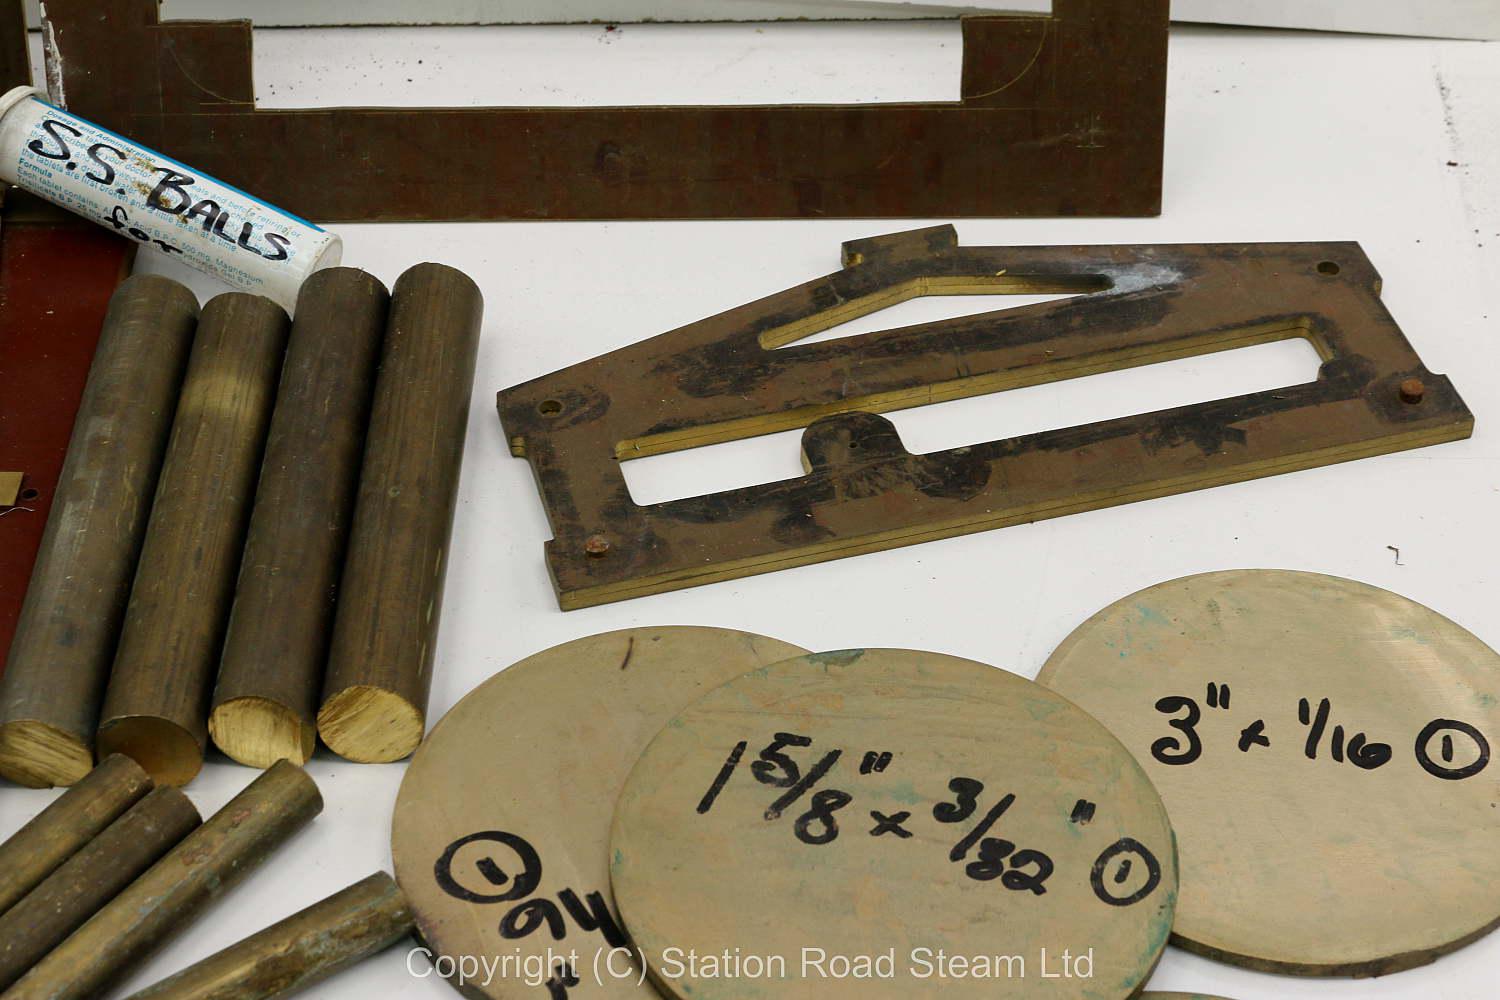 Parts & material for Congreve clock